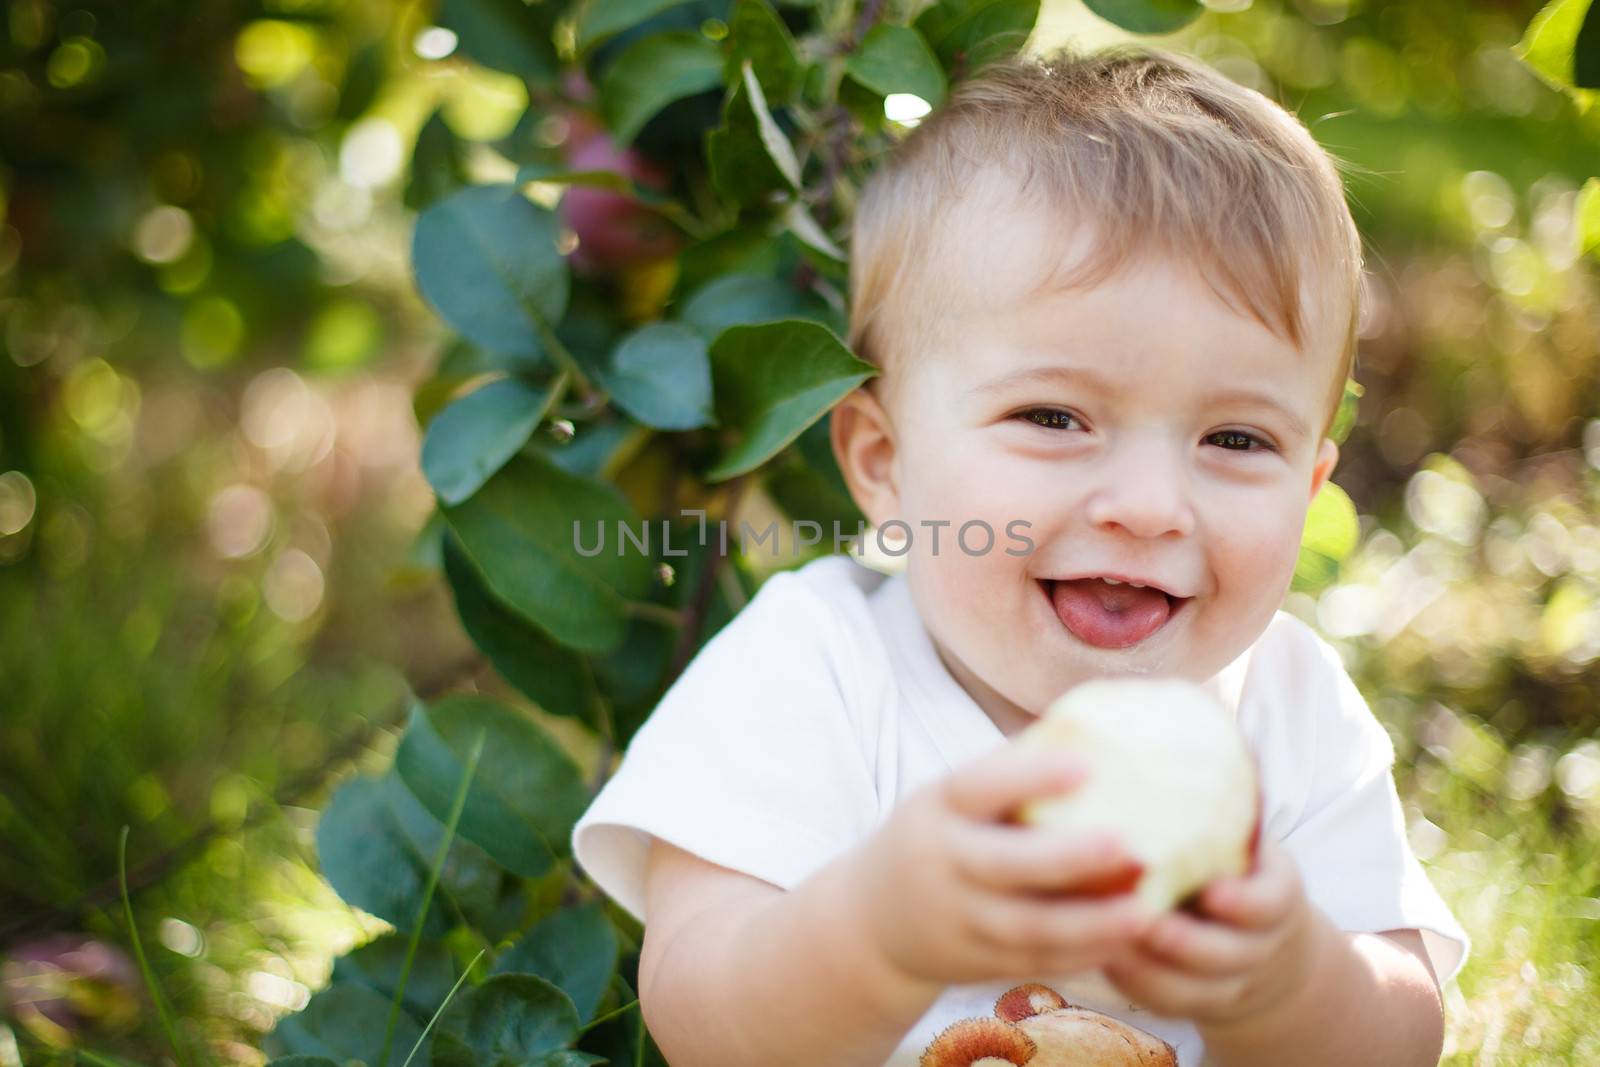 Baby eating a red apple in an orchard